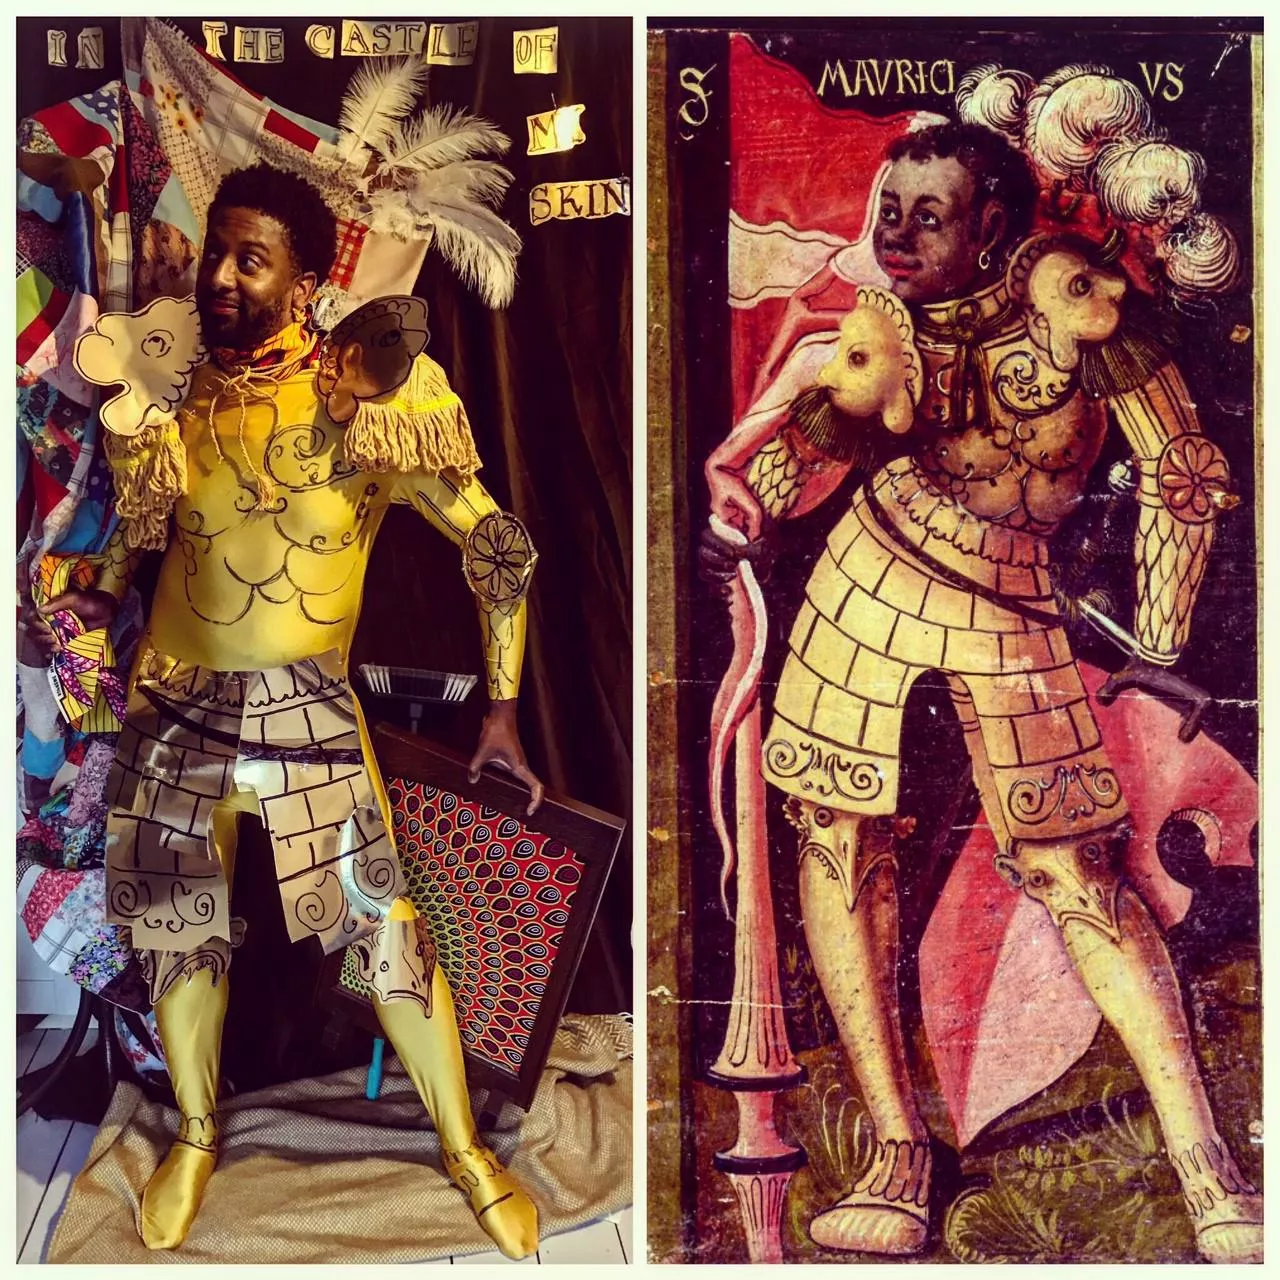 An image showing the original painting next to Peter Brathwaite's restaged image